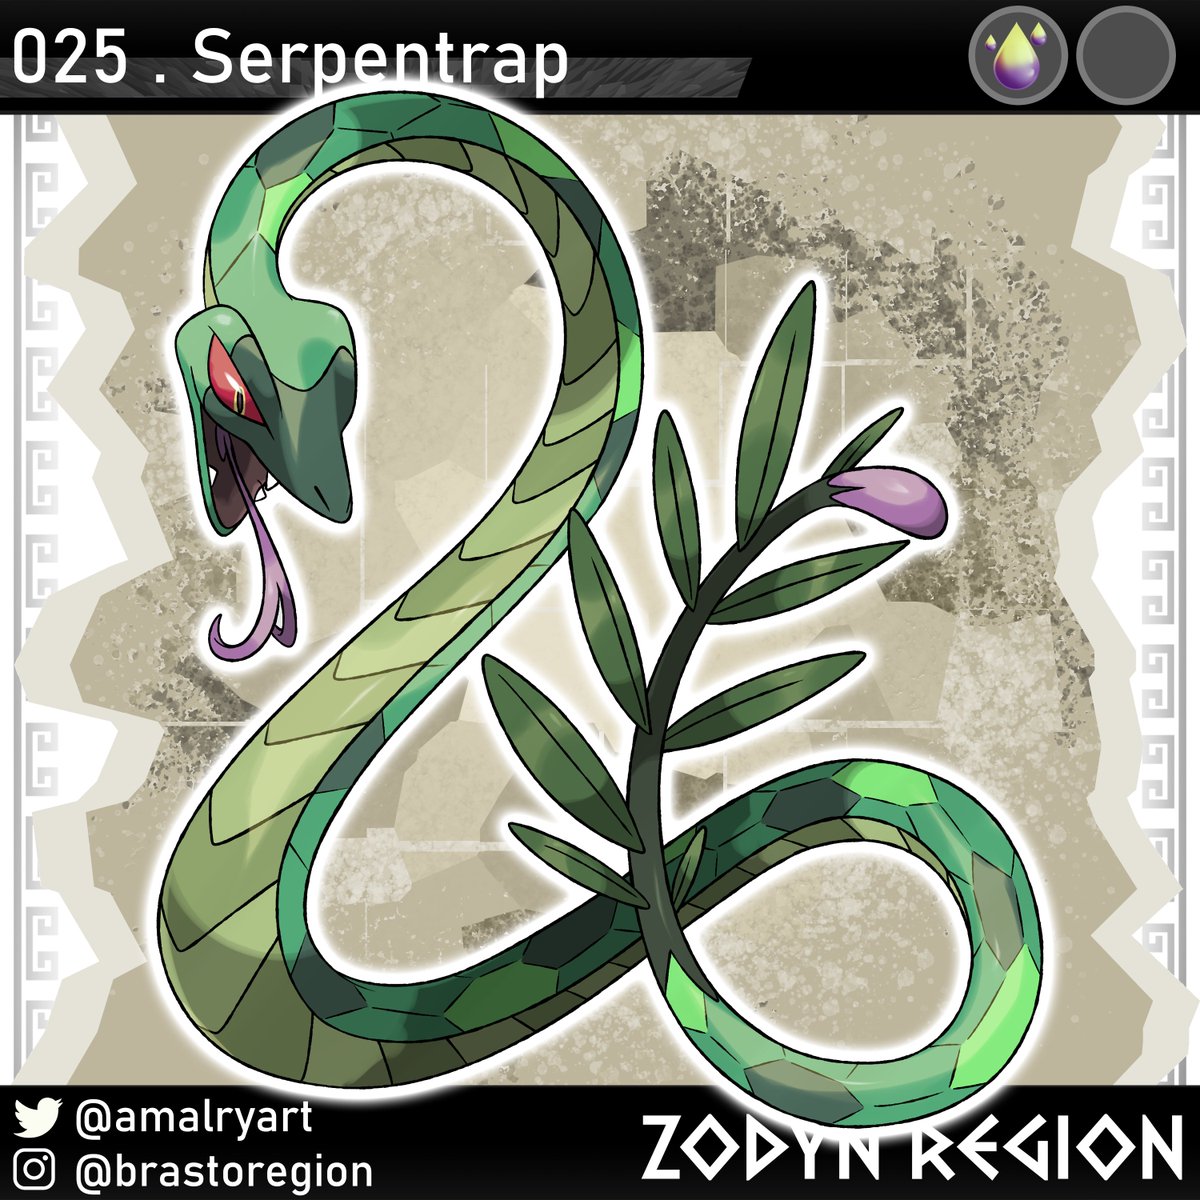 Toxibora evolves into Serpentrap! 

The tip of Serpentrap's tail is used to lure Rabunny and Gluttunny to attack them from behind. Serpentrap has a great ability to camouflage itself in the midst of crops, which facilitates its predatory instinct.

#Pokemon #fakemon